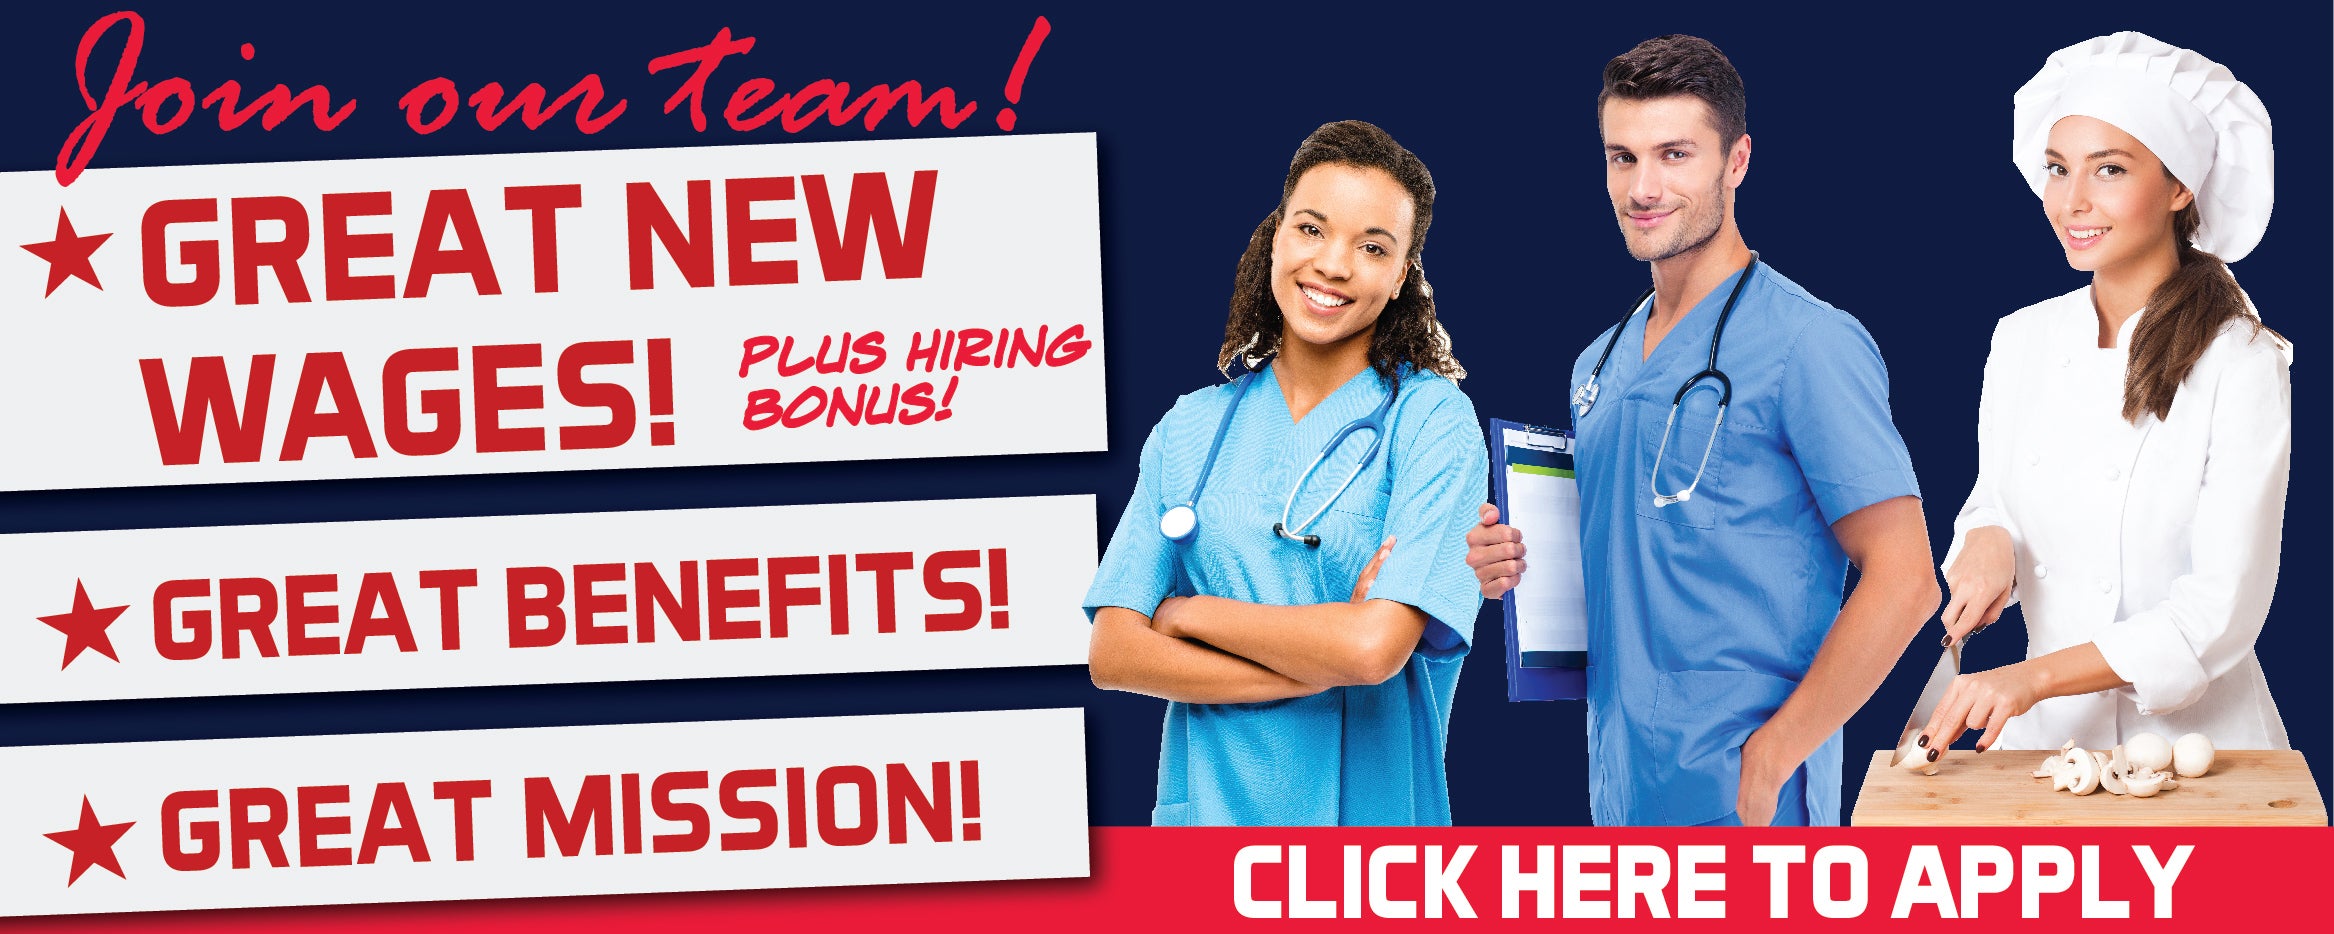 Apply today - new wages, sign-on bonuses, and more